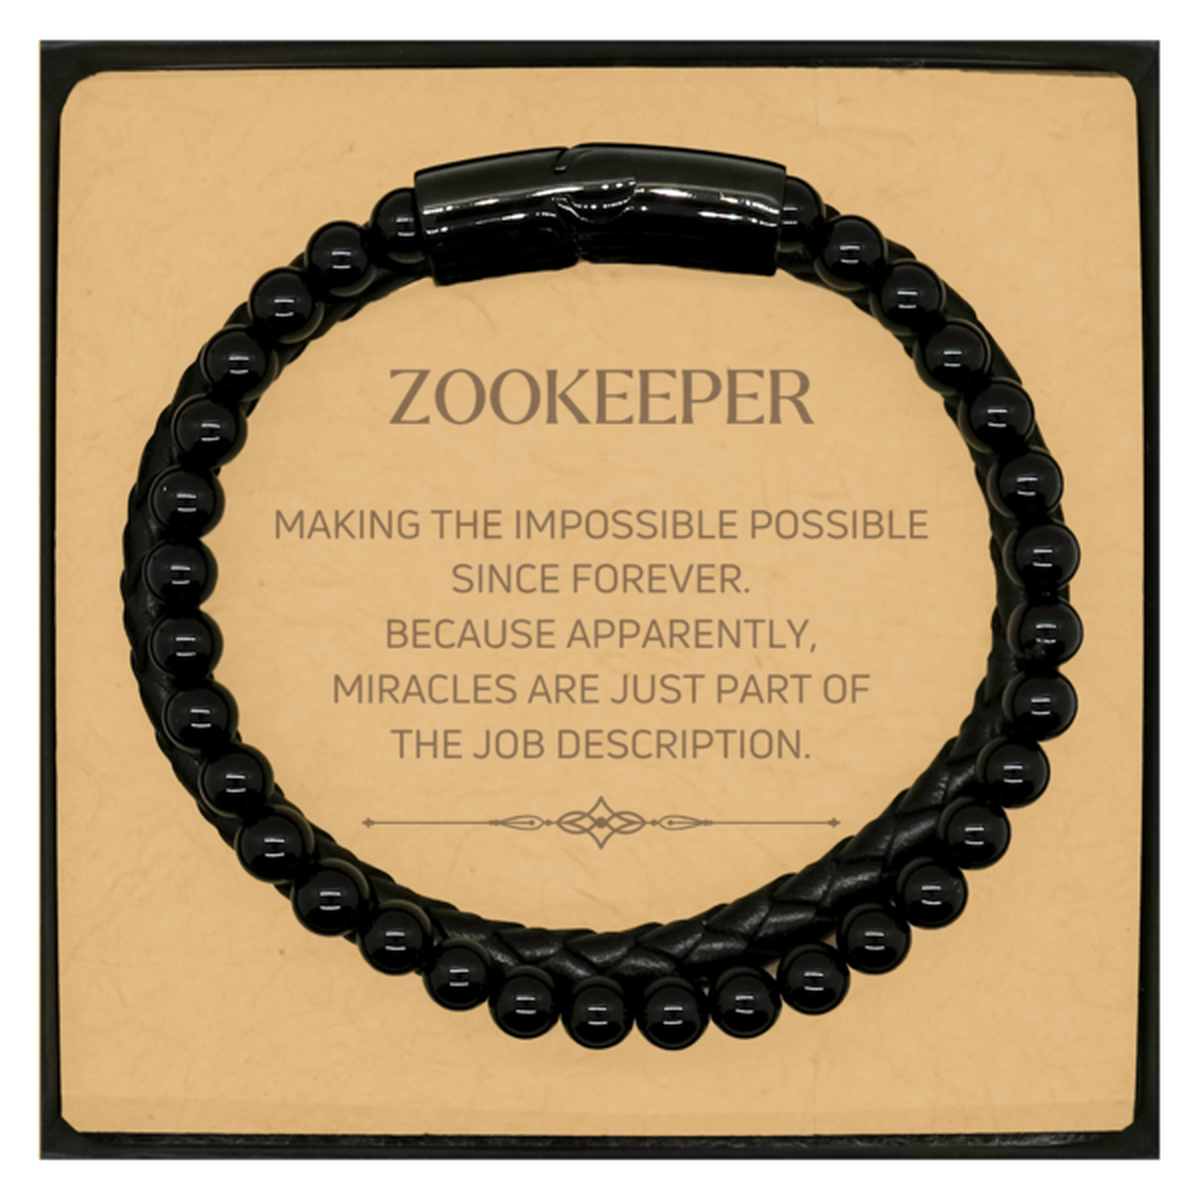 Funny Zookeeper Gifts, Miracles are just part of the job description, Inspirational Birthday Christmas Stone Leather Bracelets For Zookeeper, Men, Women, Coworkers, Friends, Boss